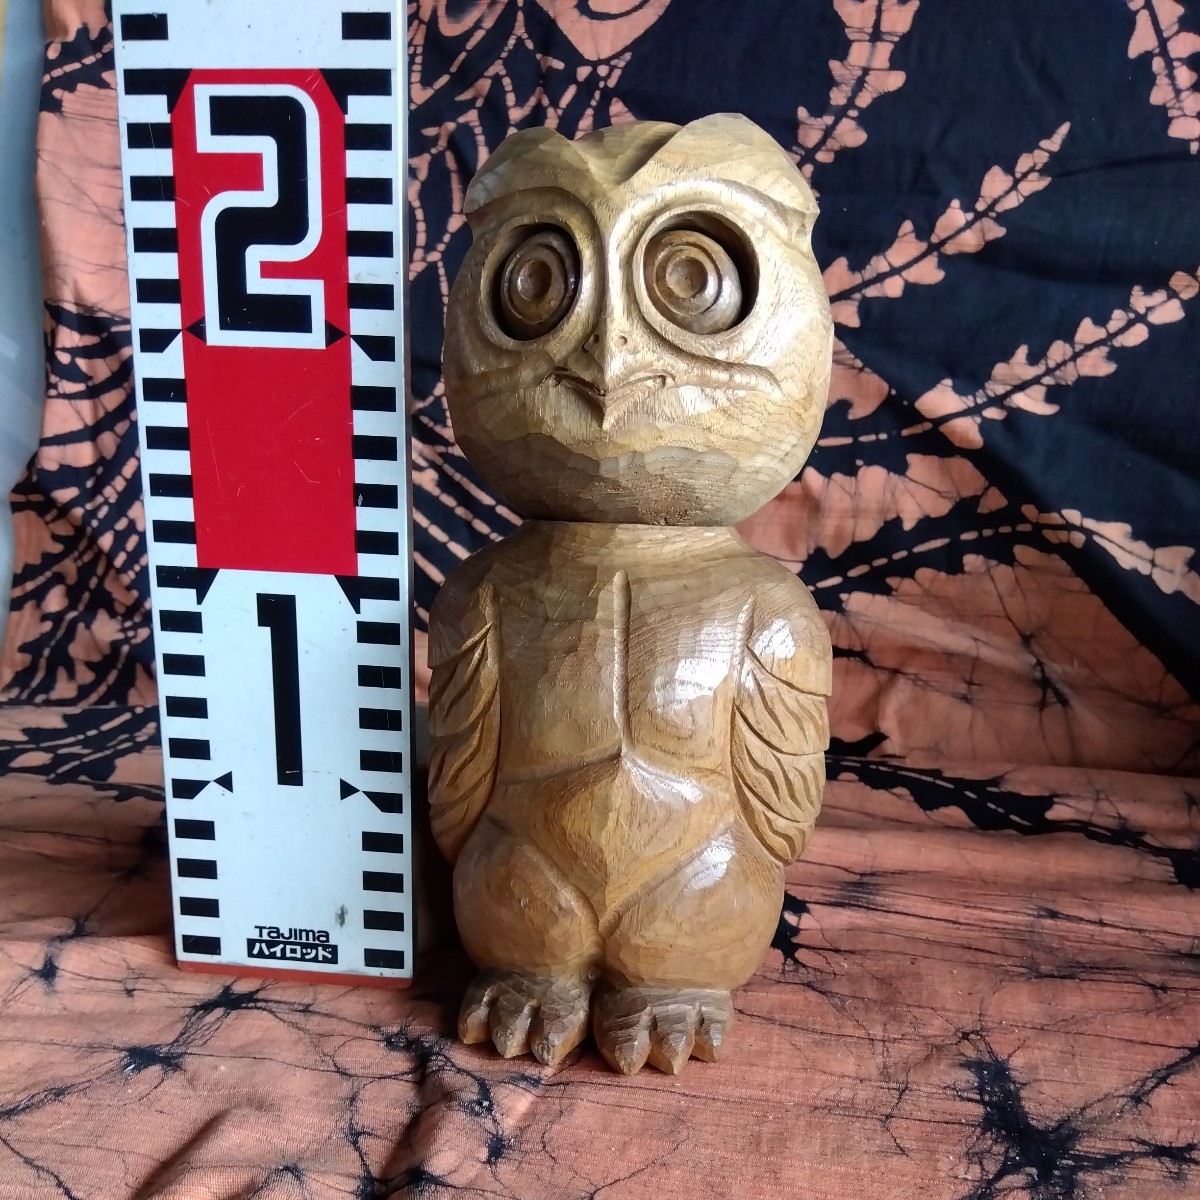 Karakuri wood carving owl Diameter around 10cm Height 20cm Weight 600g If you can understand from the image 60 sizes delivered by Otegaru, handmade works, interior, miscellaneous goods, ornament, object